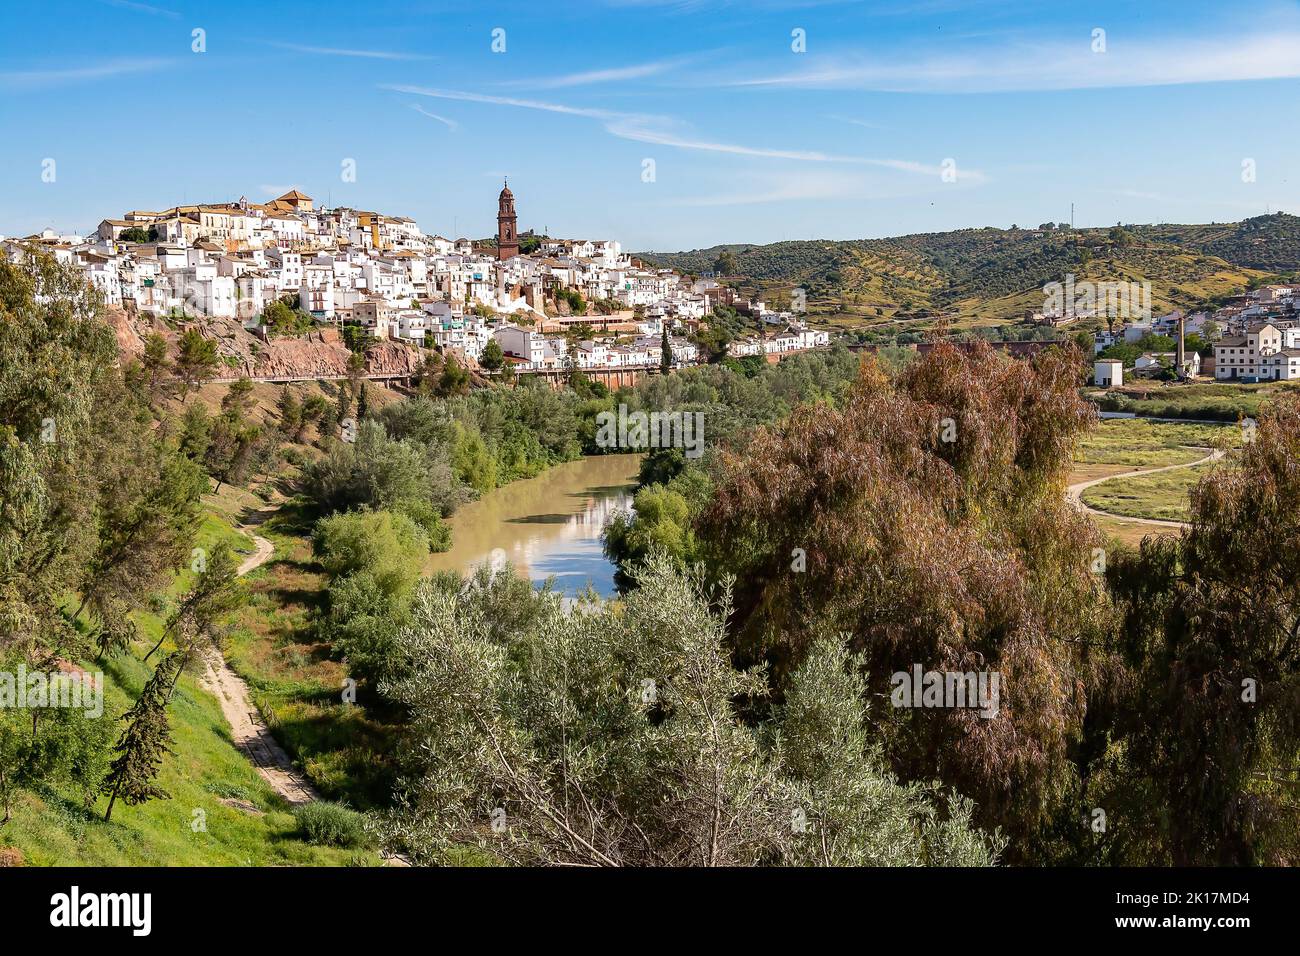 View of Montoro village, a city and municipality in the Cordoba Province of southern Spain, in the north-central part of the autonomous community of A Stock Photo